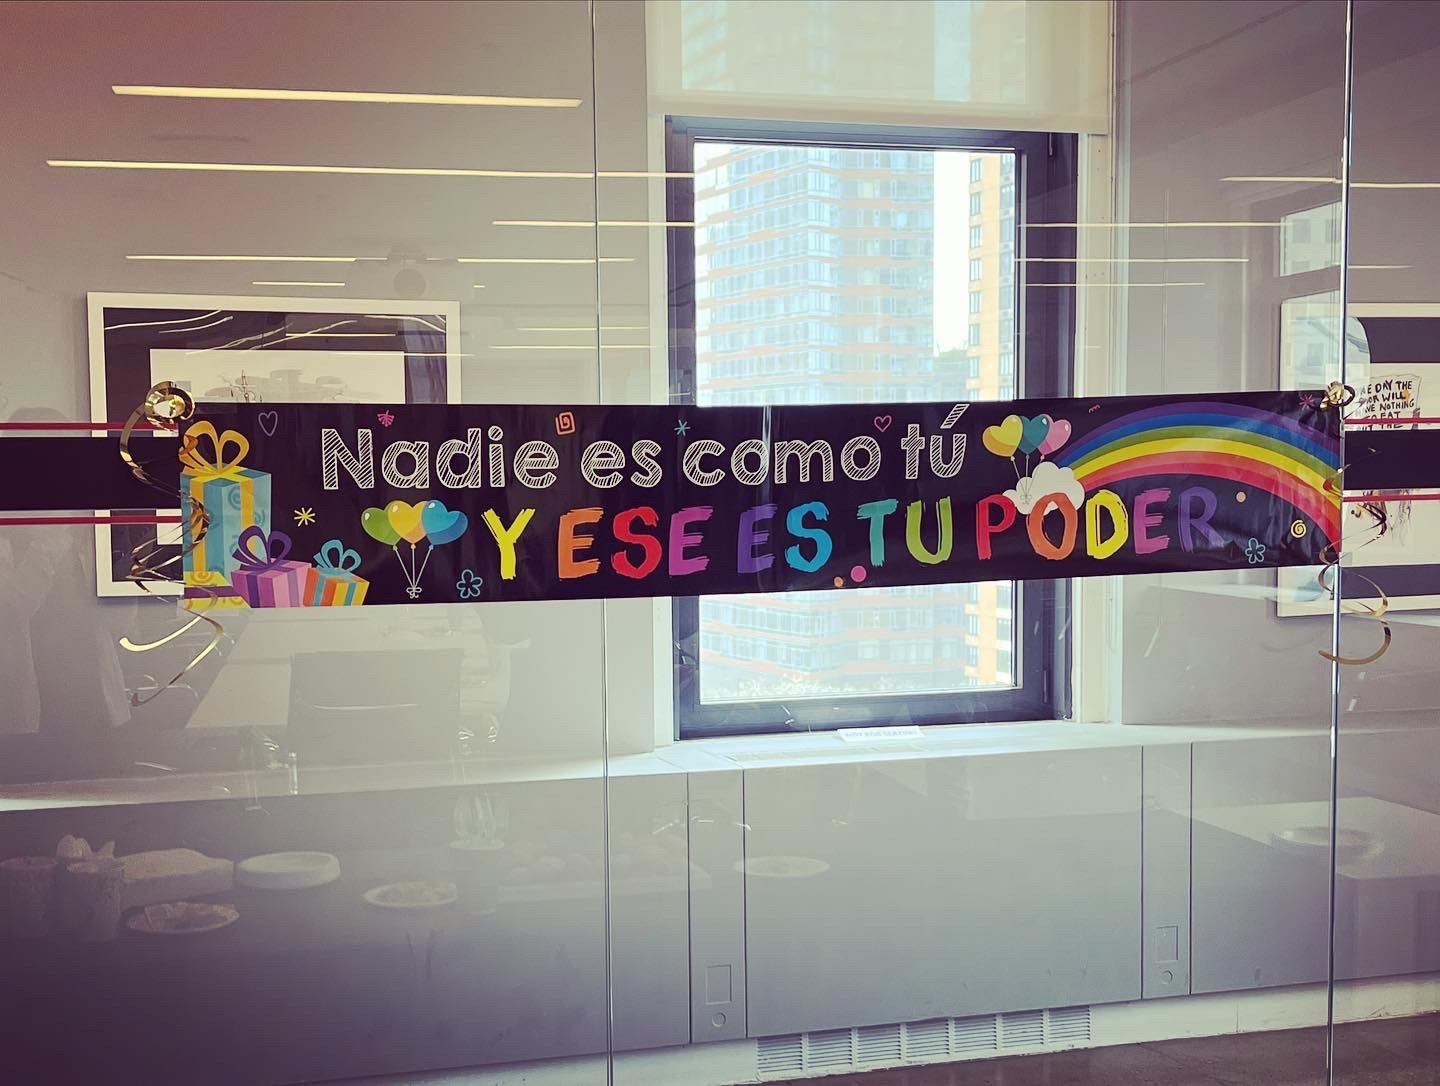 A festive banner on a clear glass window that reads "Nadie es como tu y ese es tu poder" (No one is like you and this is your power)